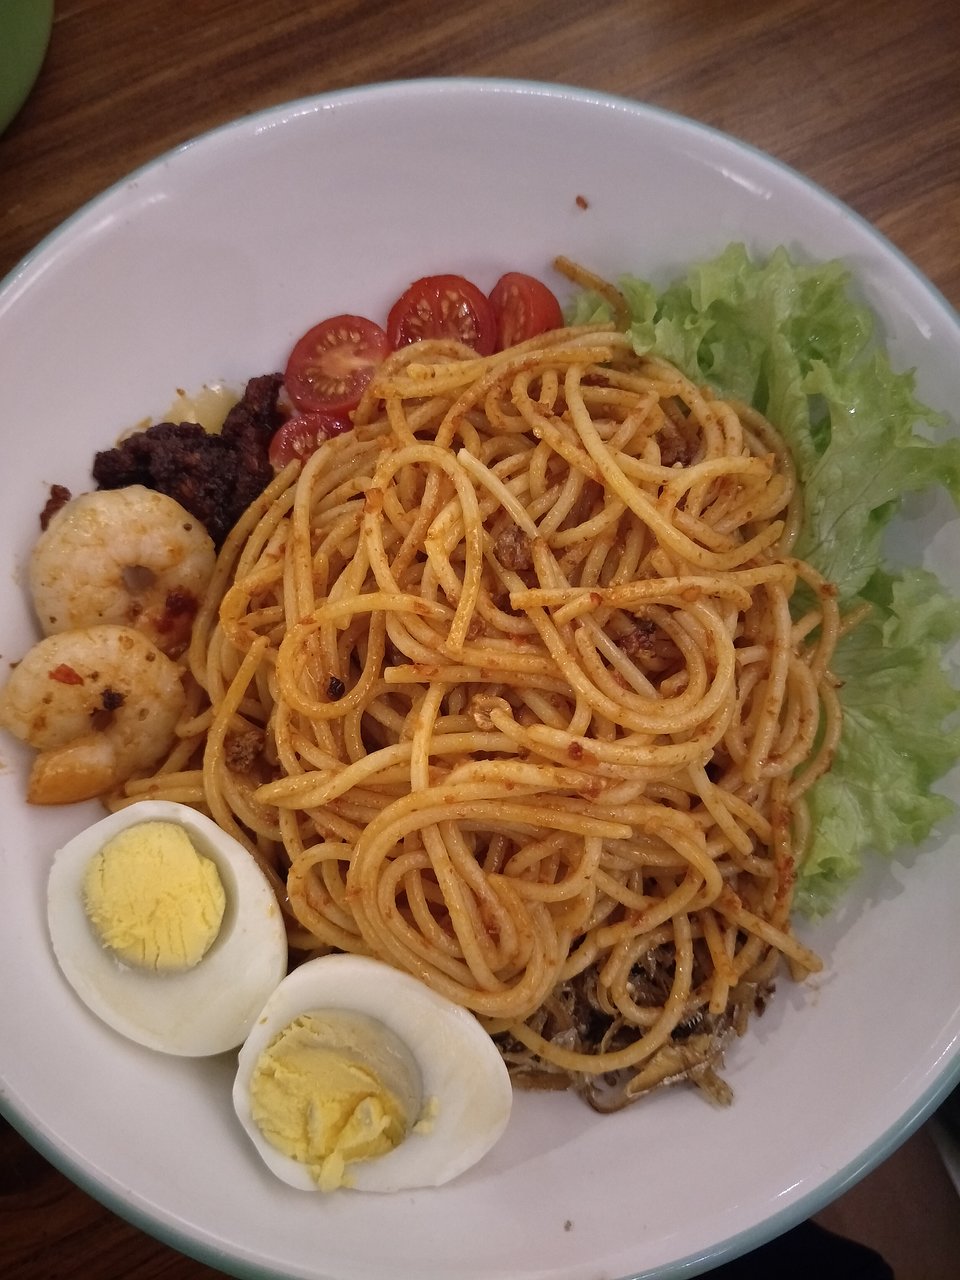 Tasty noodles of Relish the Moment cafe in Malacca (Melaka)